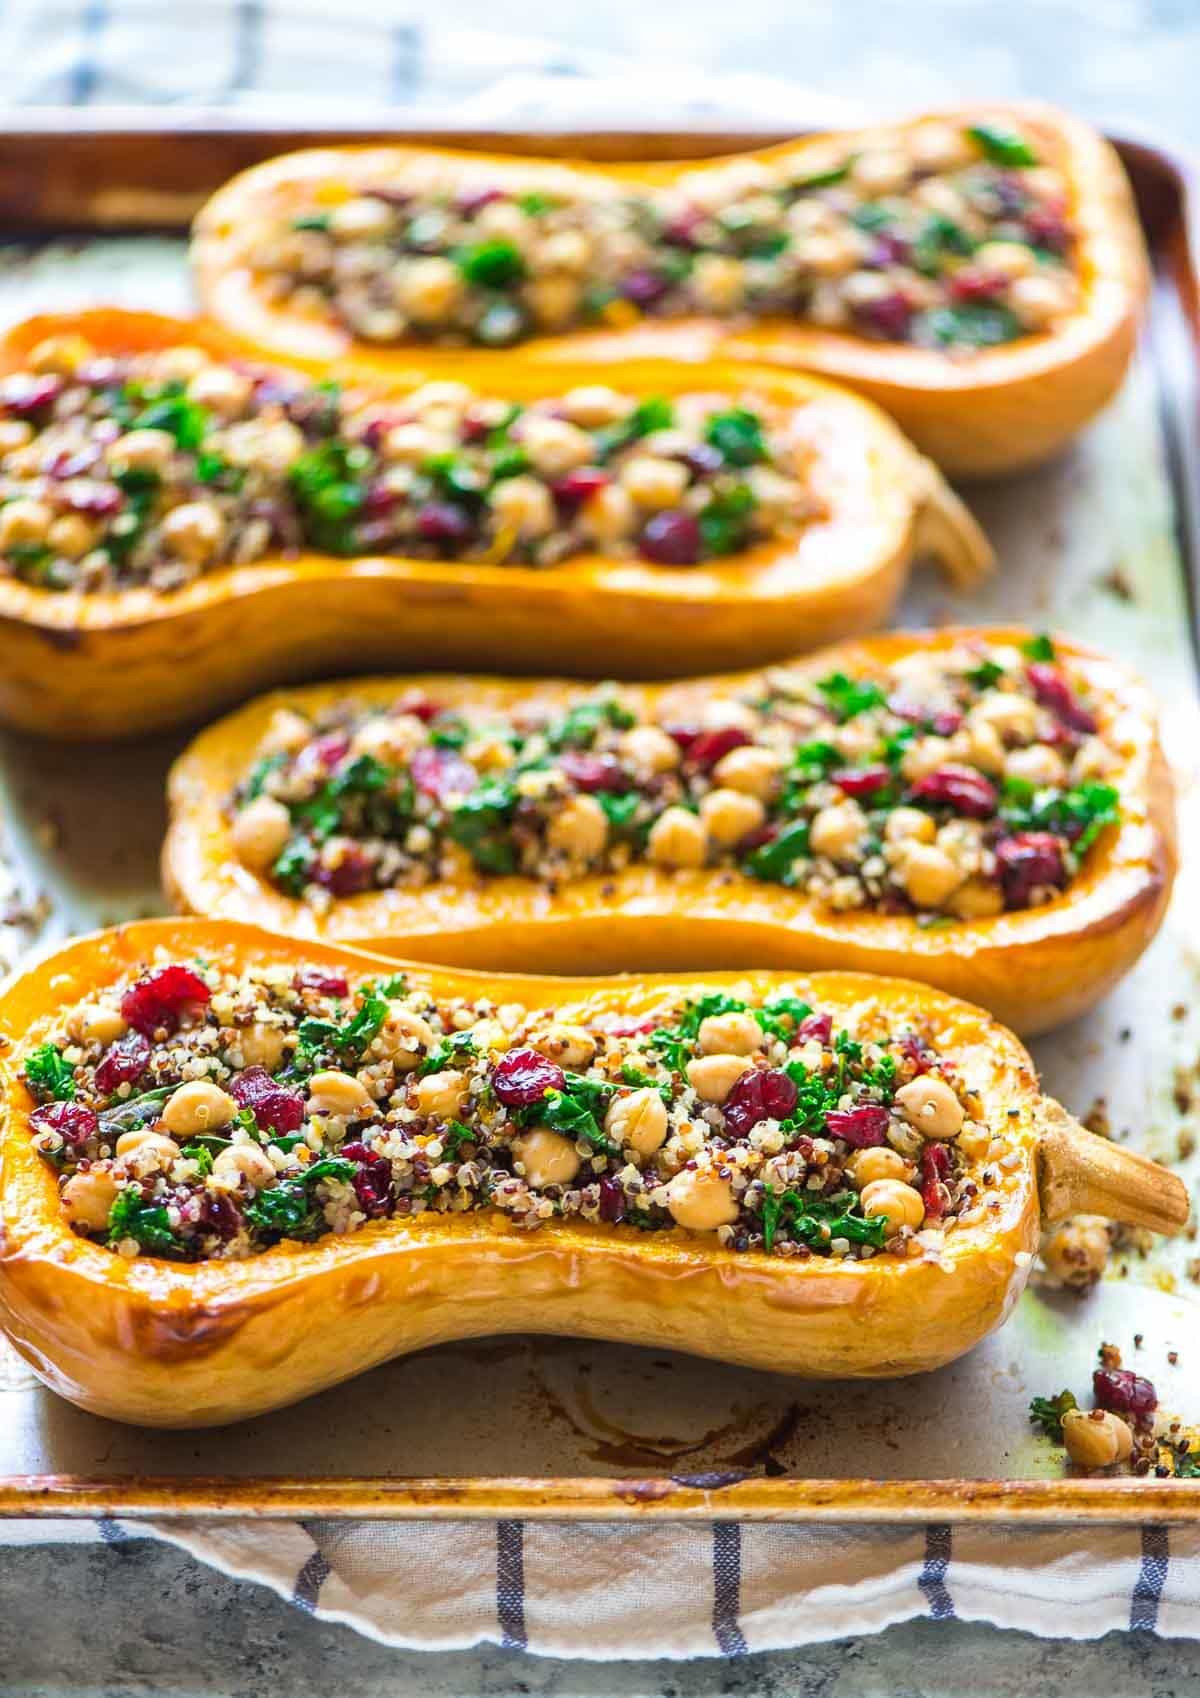 Easy Fall Dinner Recipe
 Quinoa Stuffed Butternut Squash with Cranberries and Kale